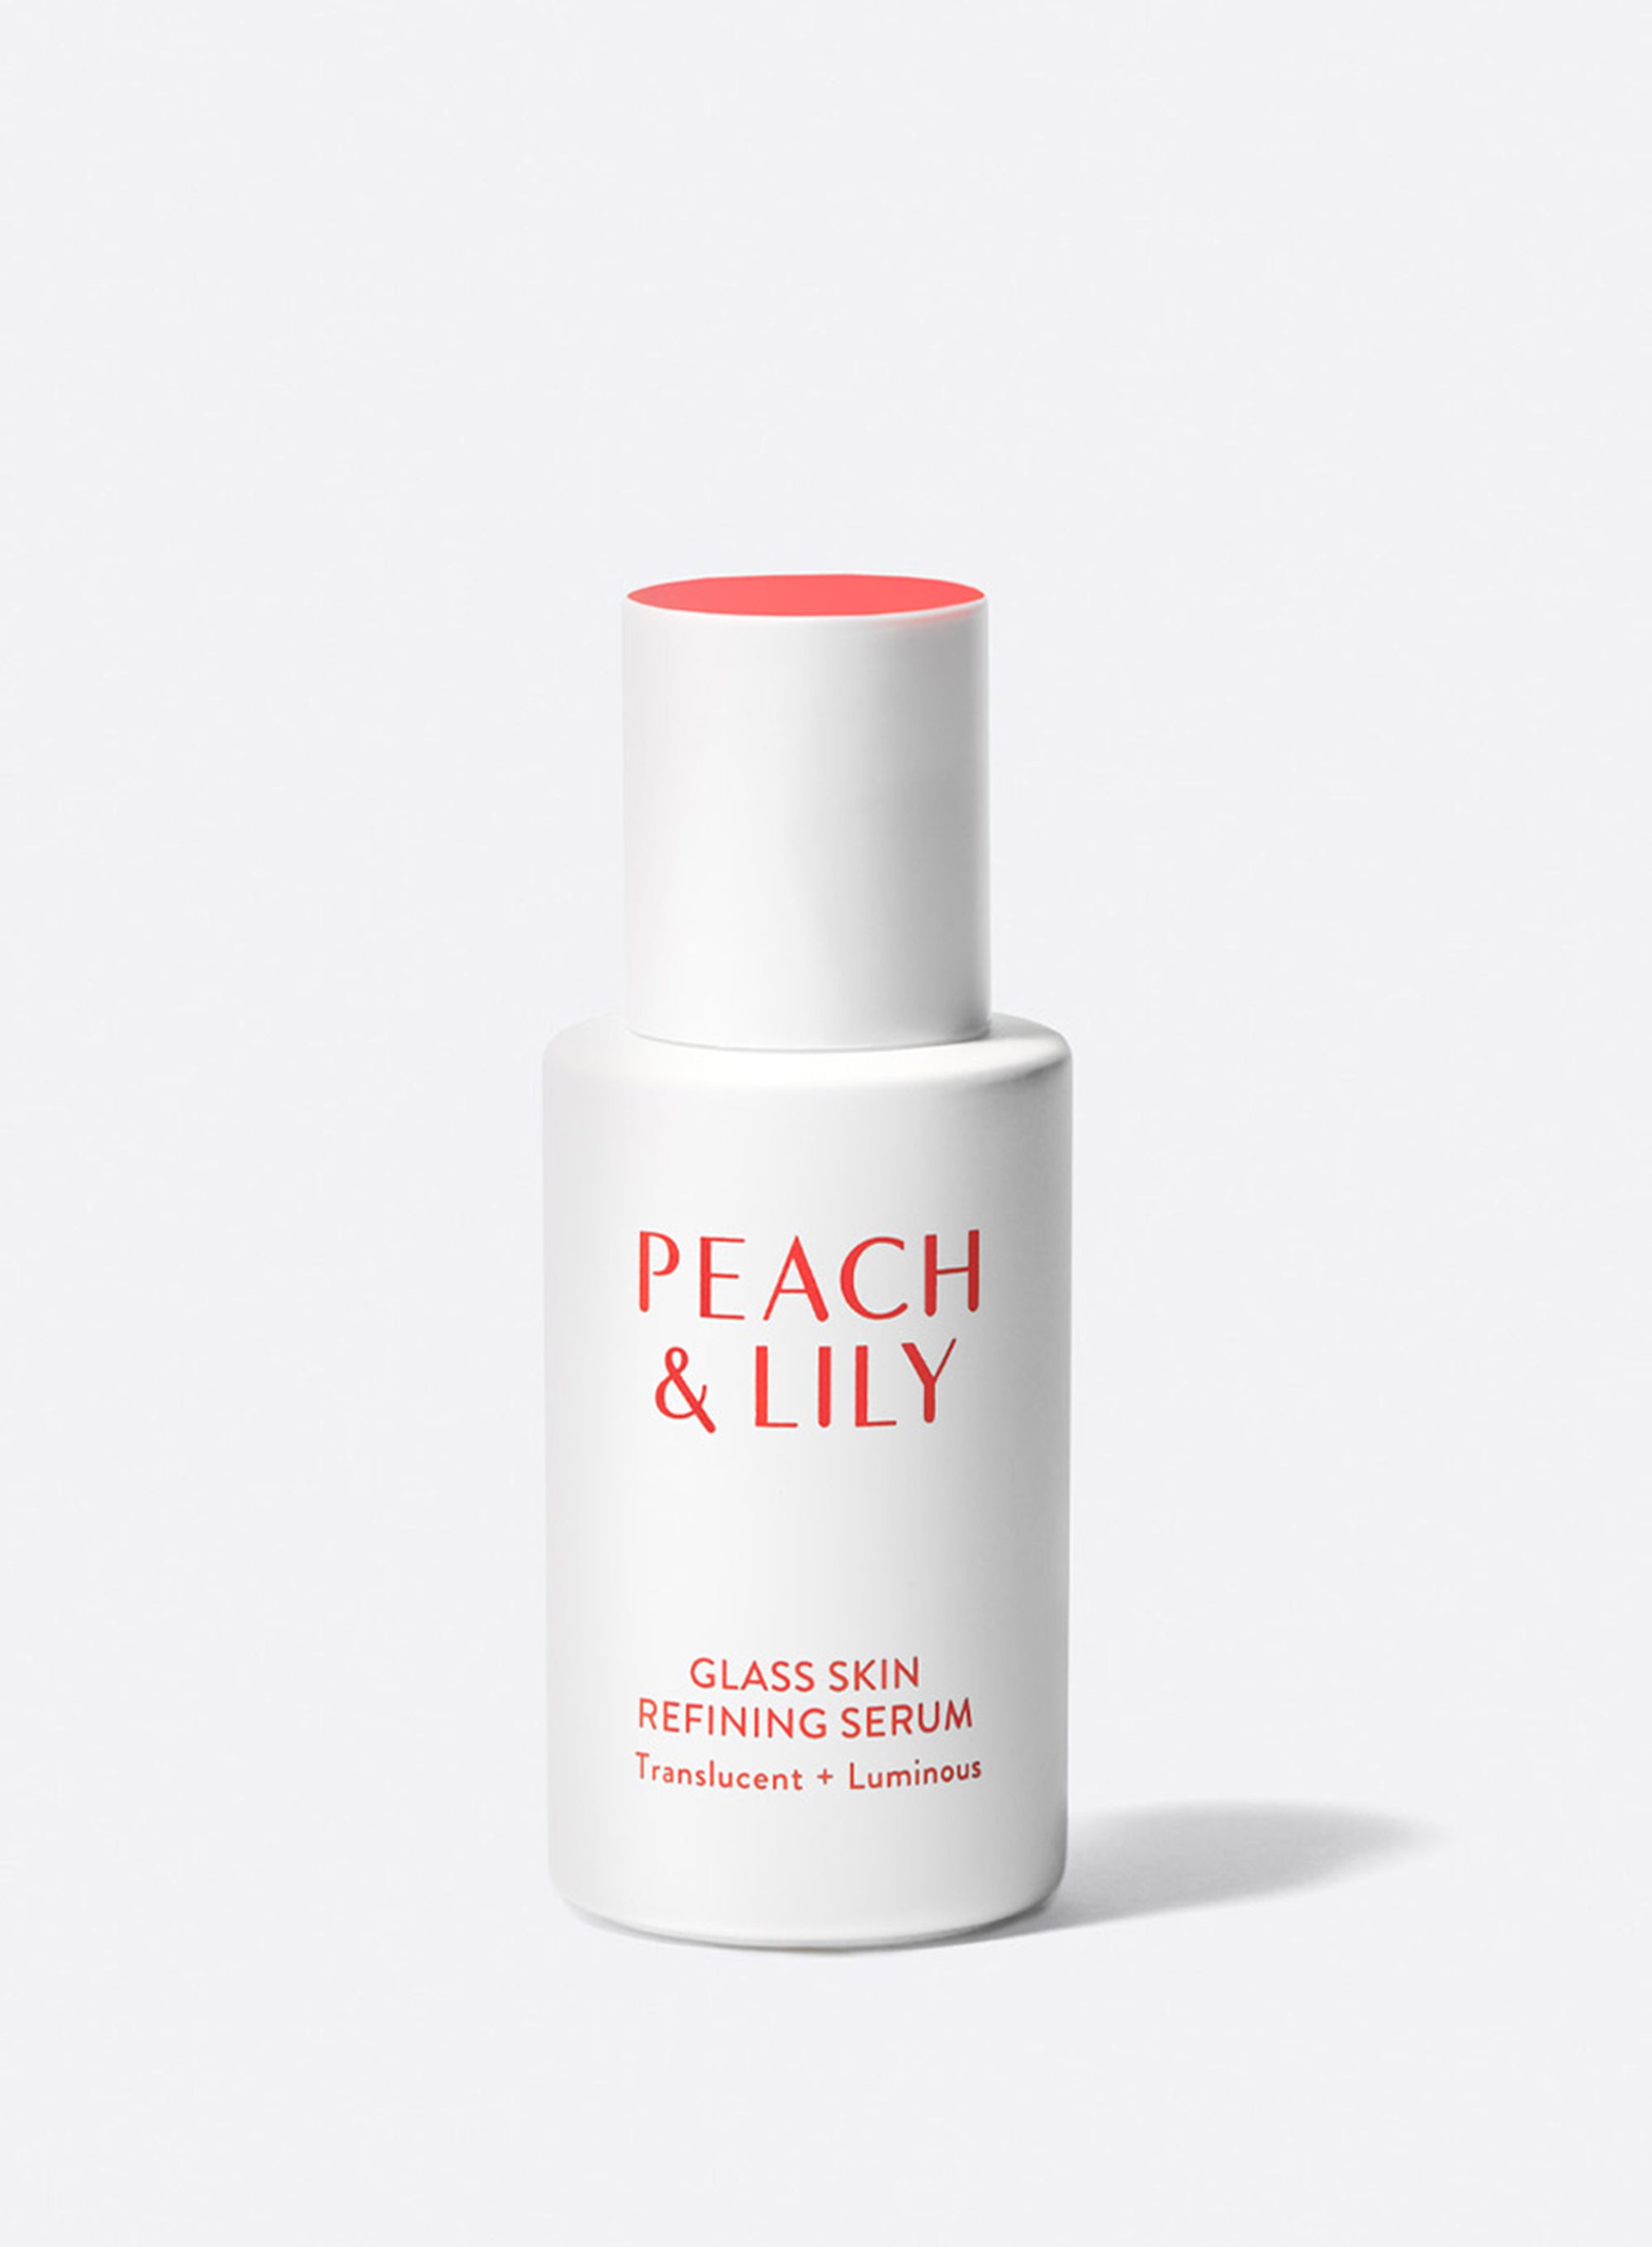 Peach & Lily Skin Shield Blurring Primer, Protect + Smooth, 1 fl oz/30 mL  Ingredients and Reviews